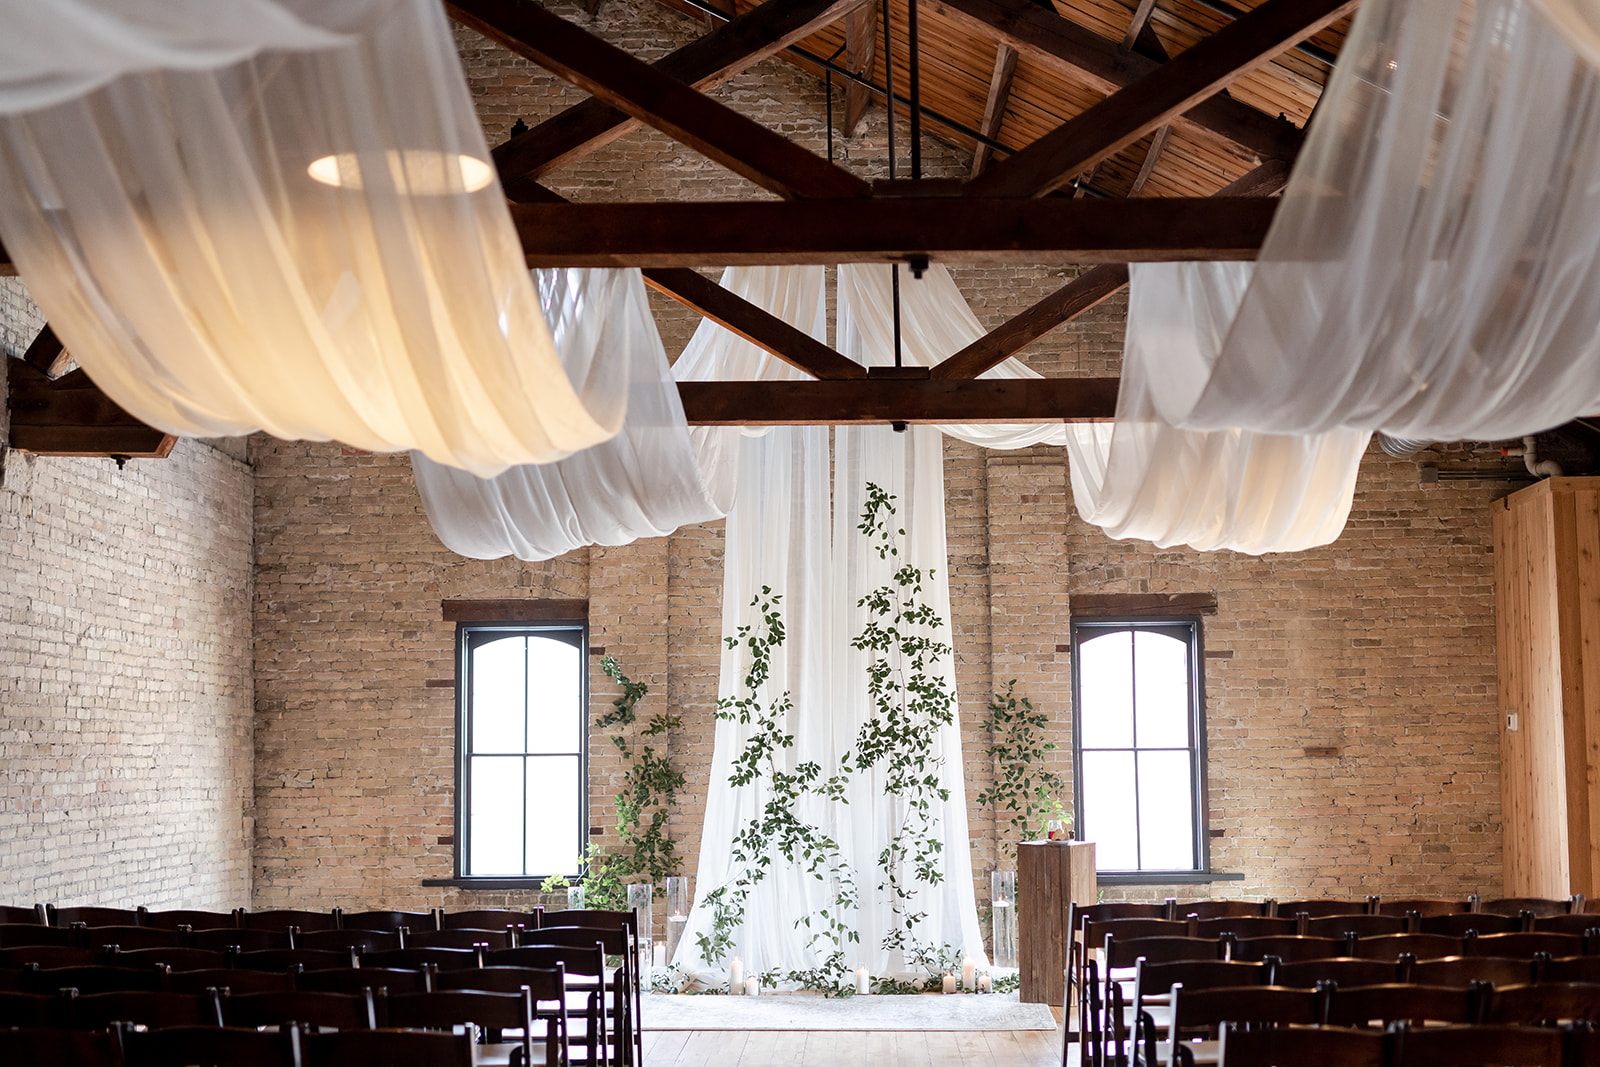 Ceremony details with draping